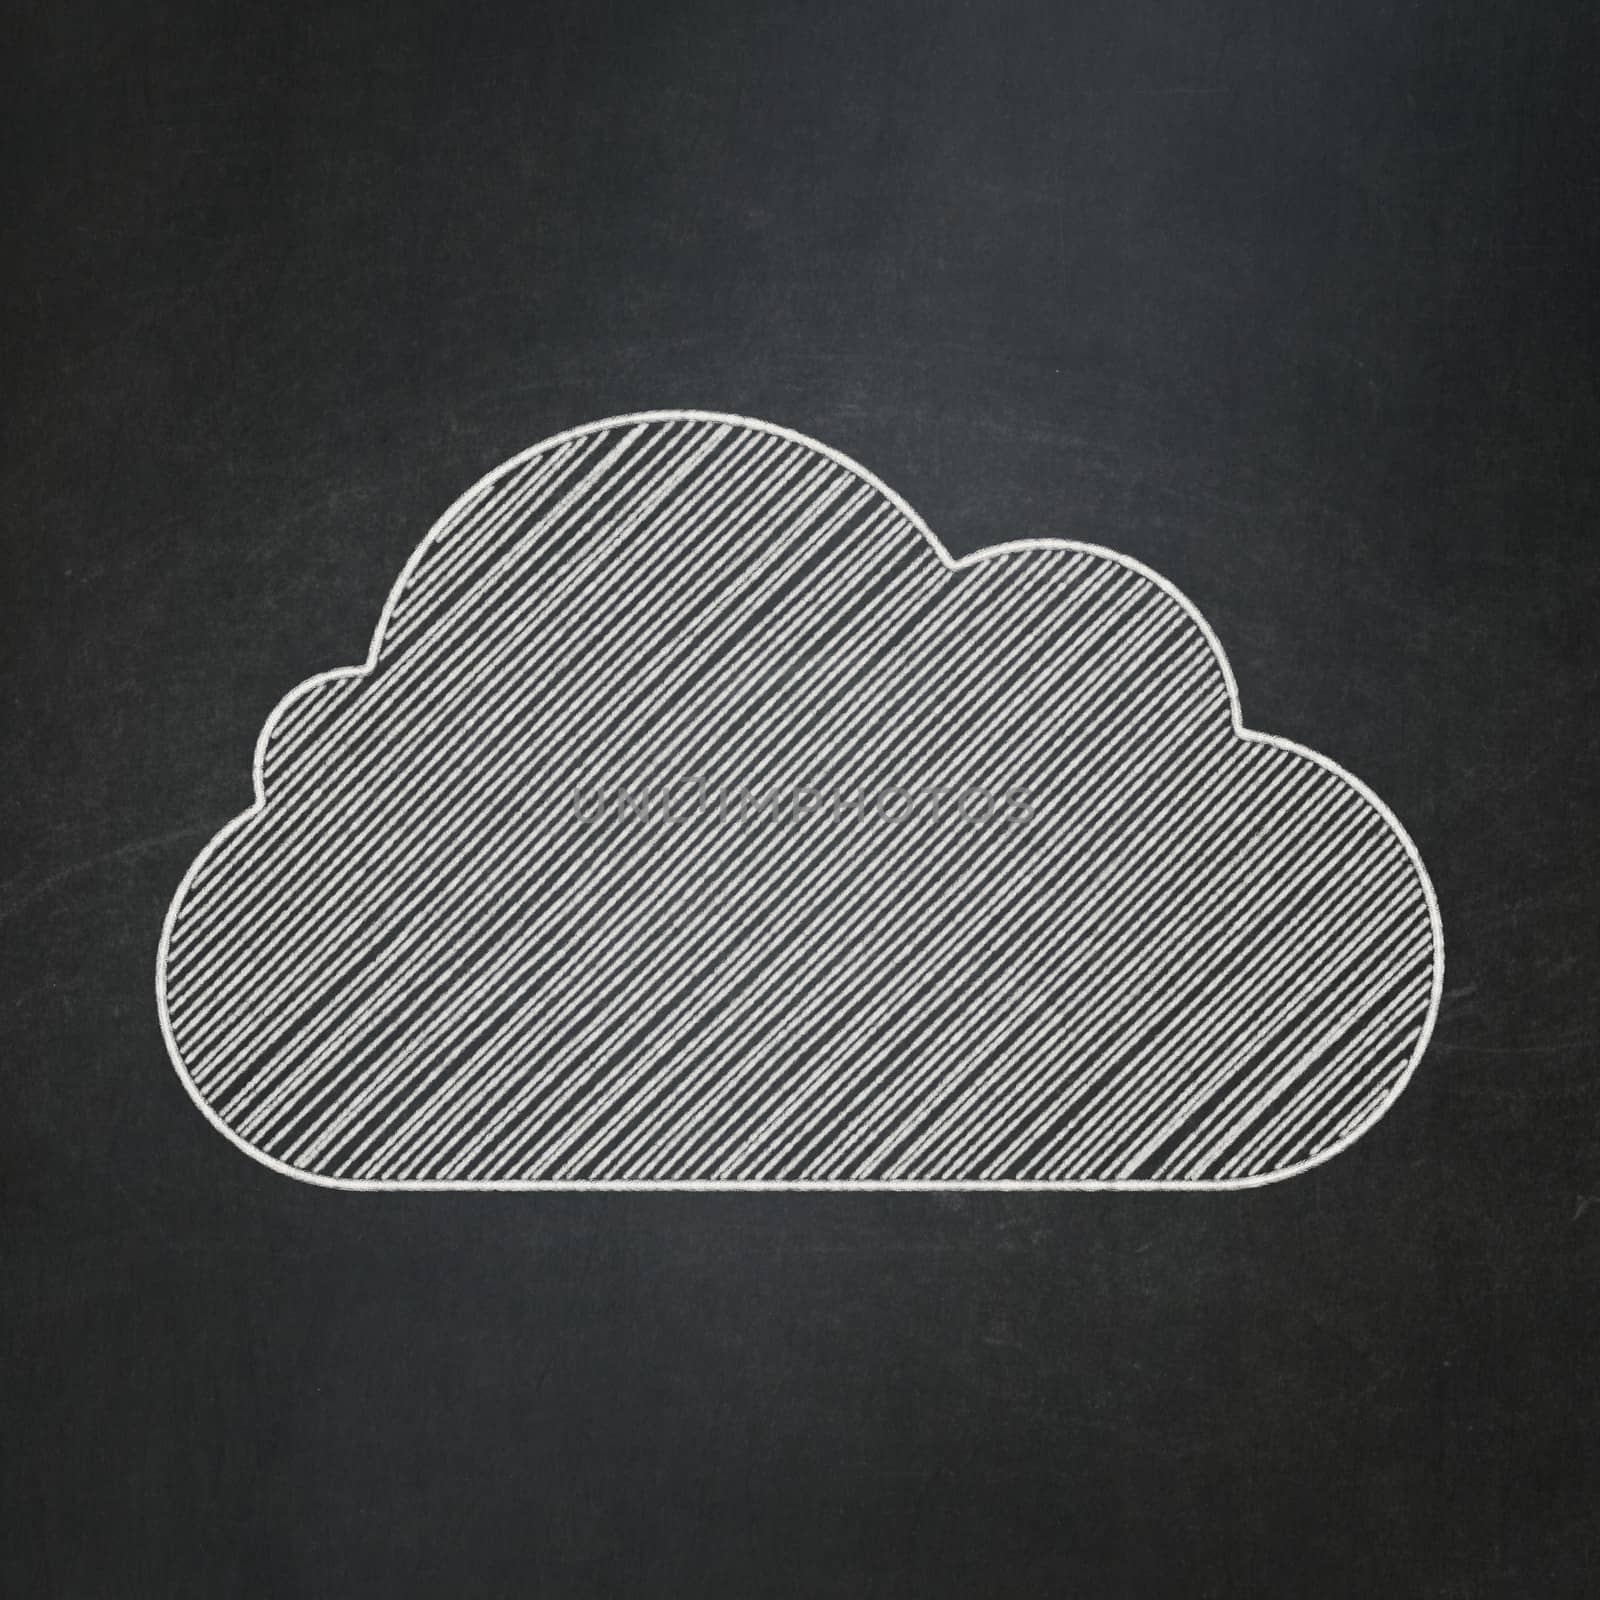 Cloud computing concept: Cloud icon on Black chalkboard background, 3d render